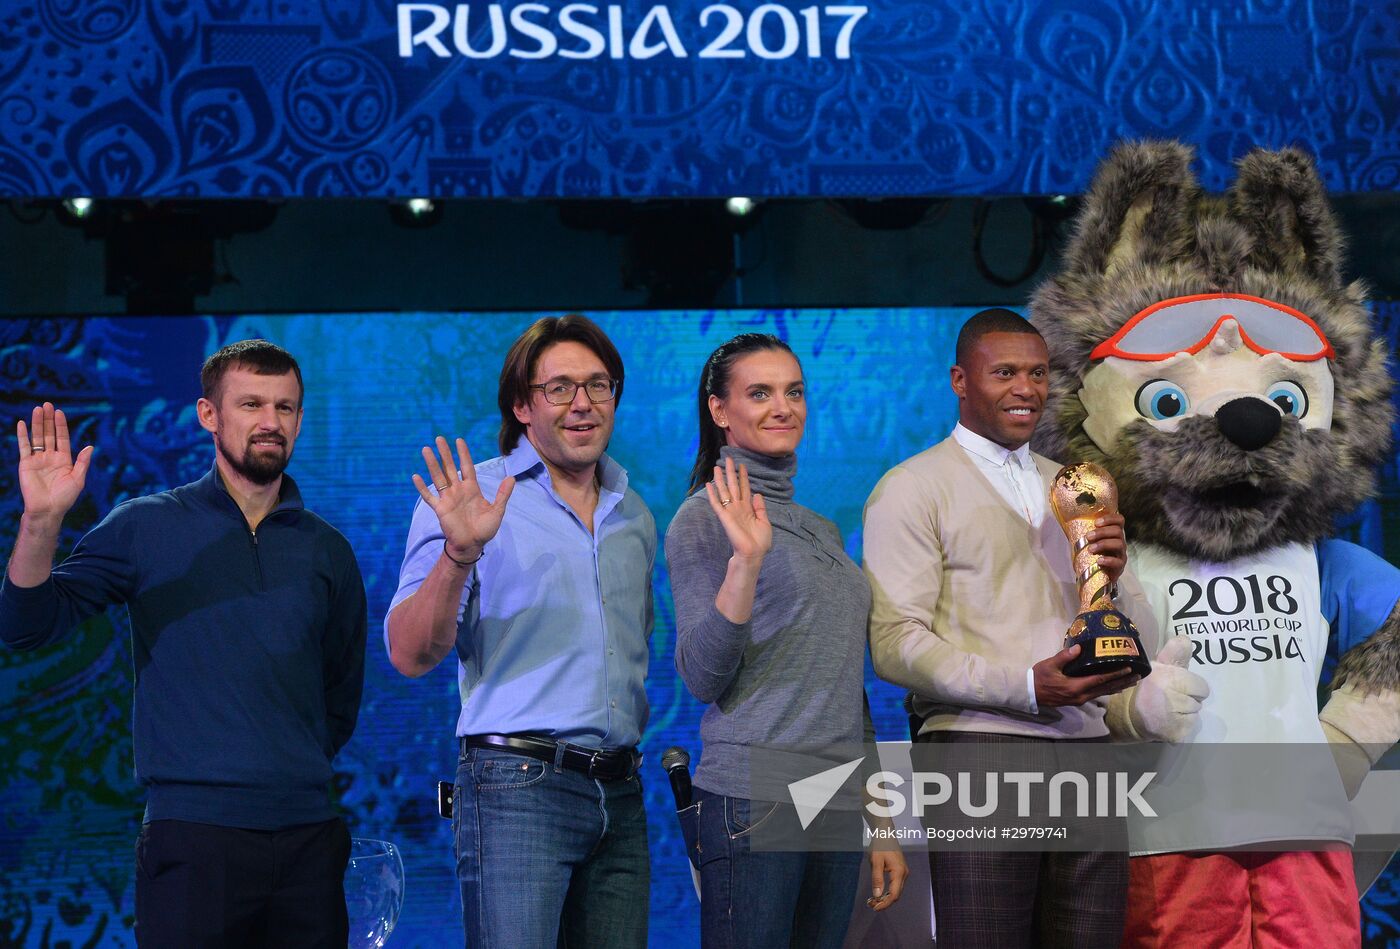 Preparation for 2017 Confederations Cup draw